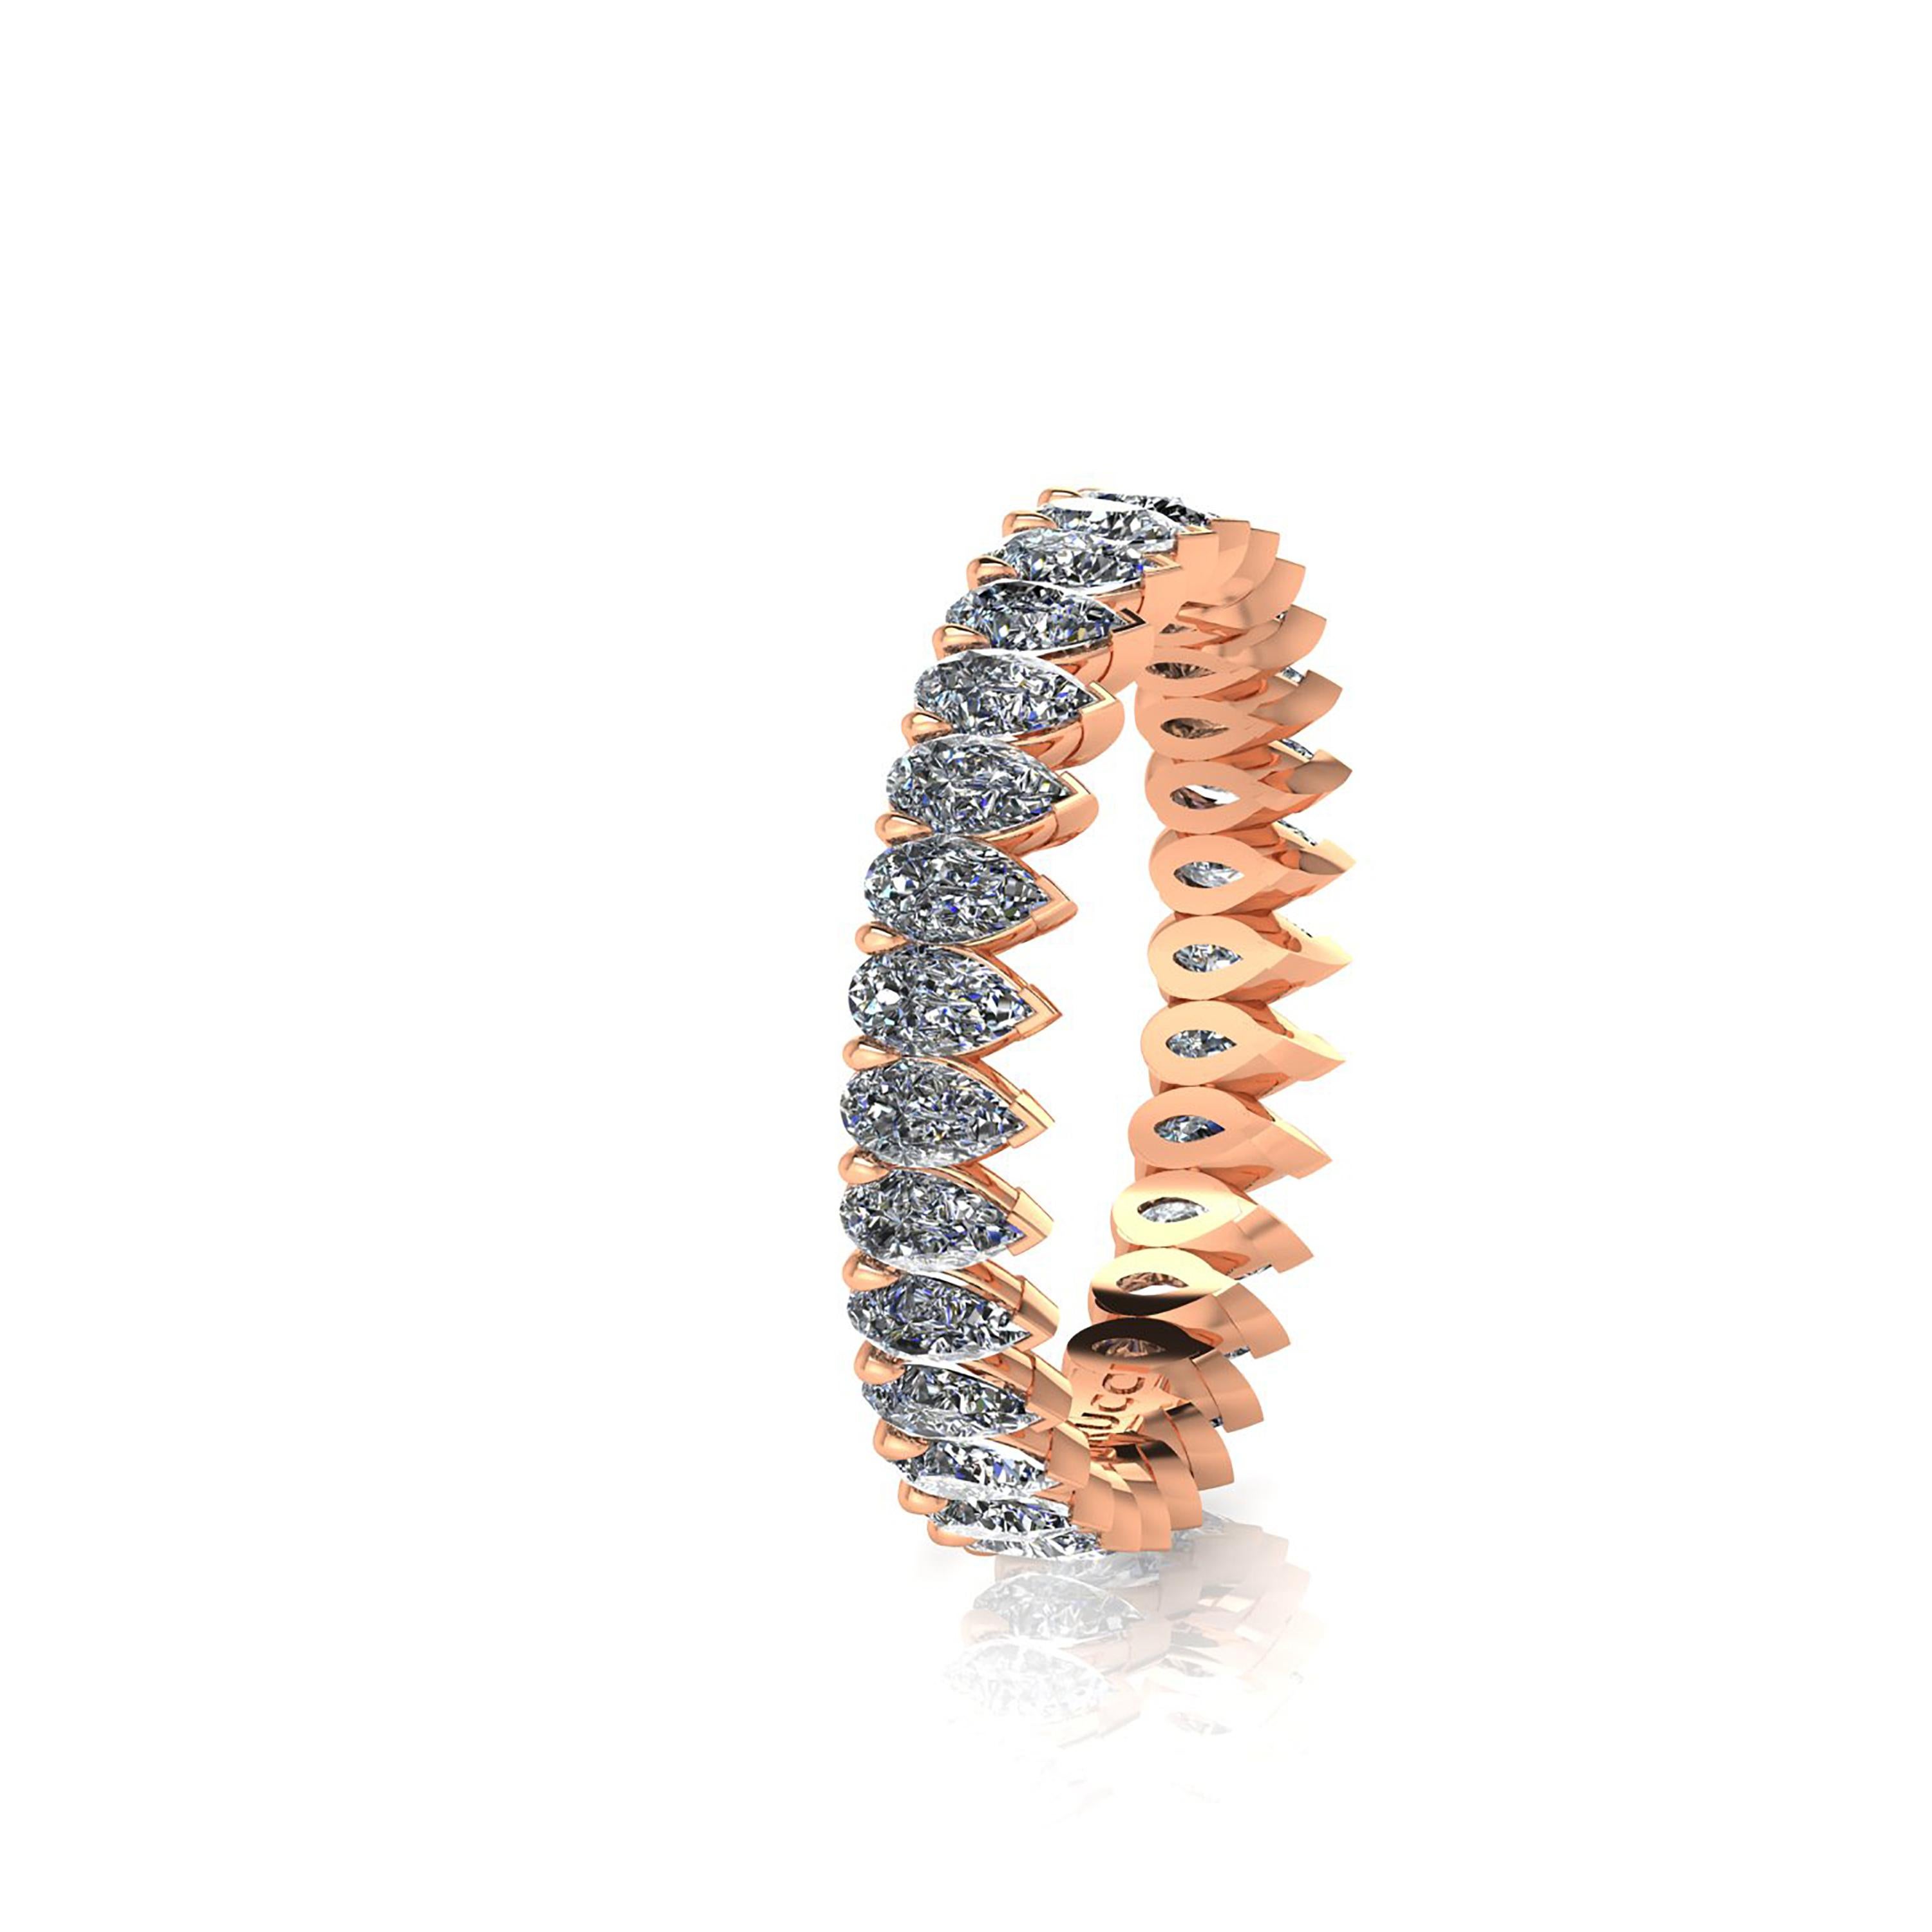 A classic FERRUCCI 1.90 carats of bright white diamonds G color, VS clarity, set to perfection in a hand crafted 18k Rose gold eternity band, 5 mm wide, stackable collection, made in New York with the best Italian craftsmanship, size 6,